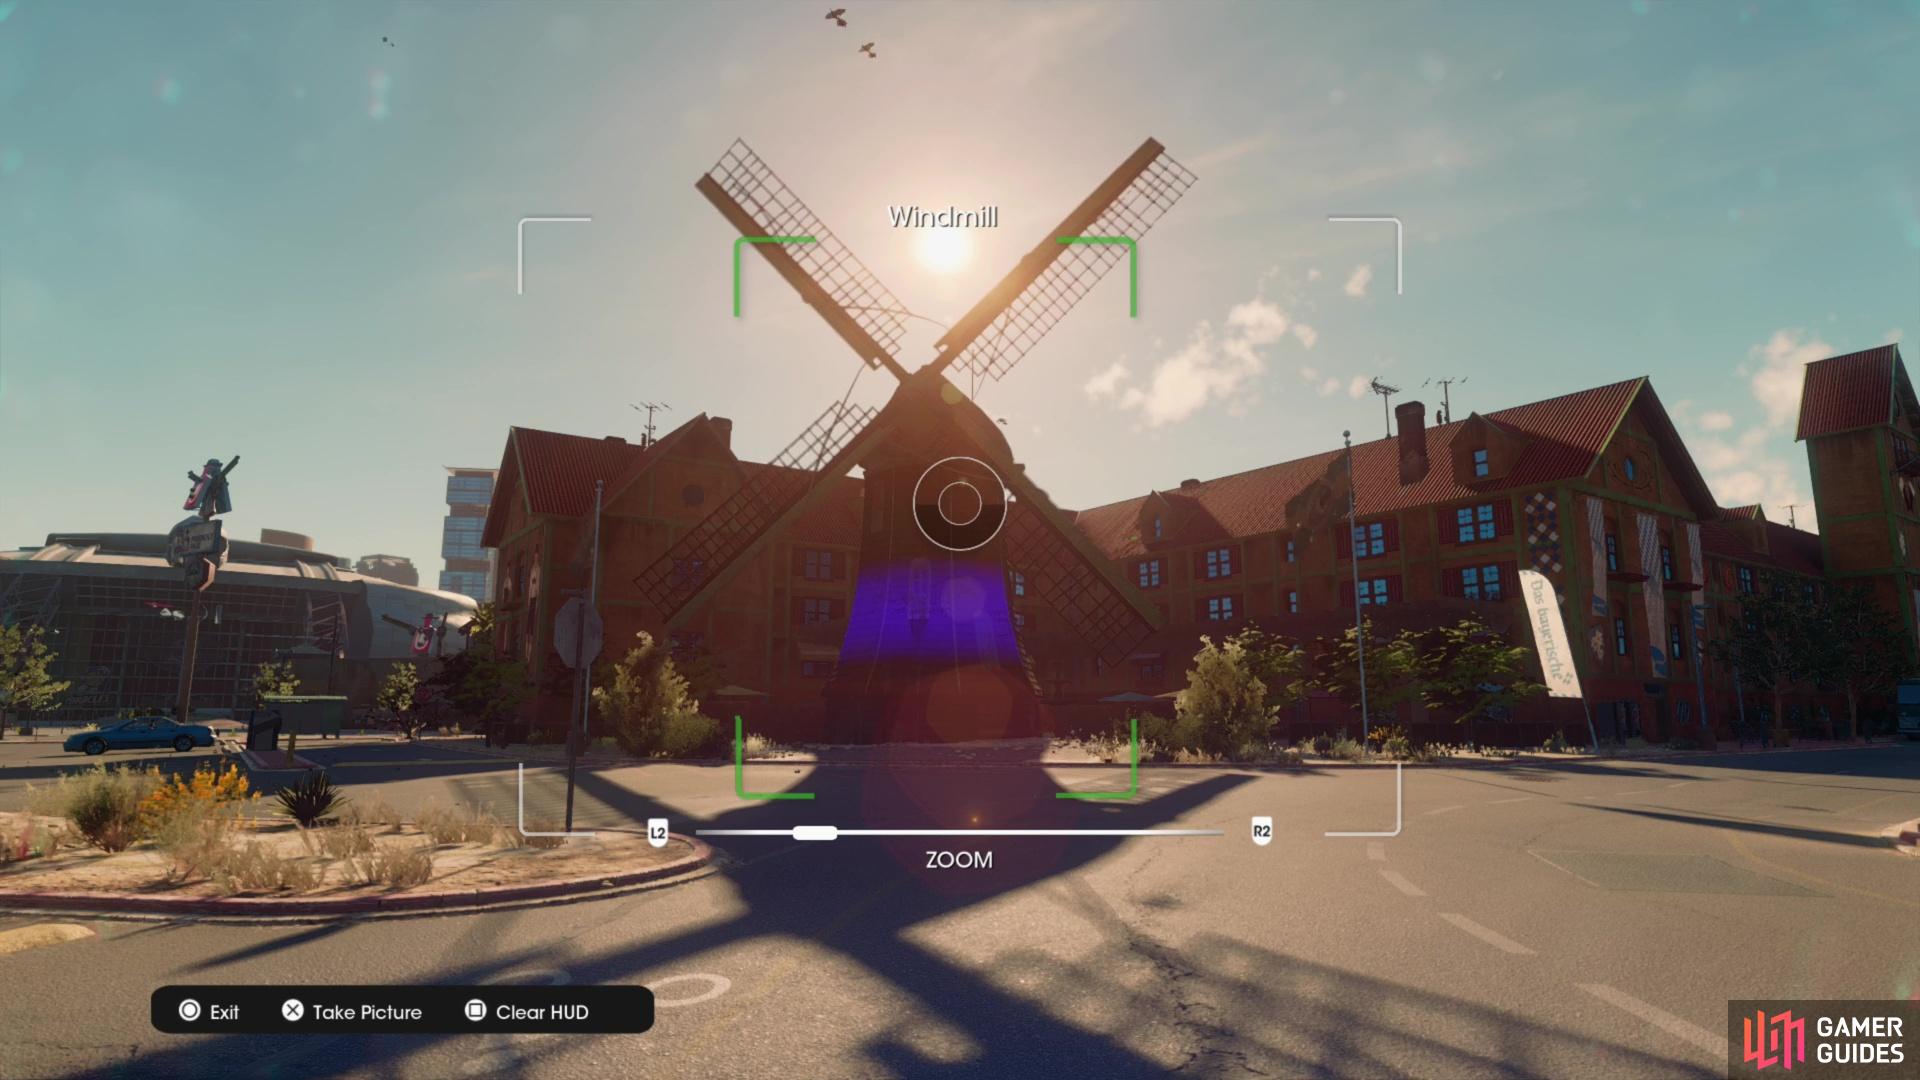 Take a picture of the Windmill collectible to obtain it.